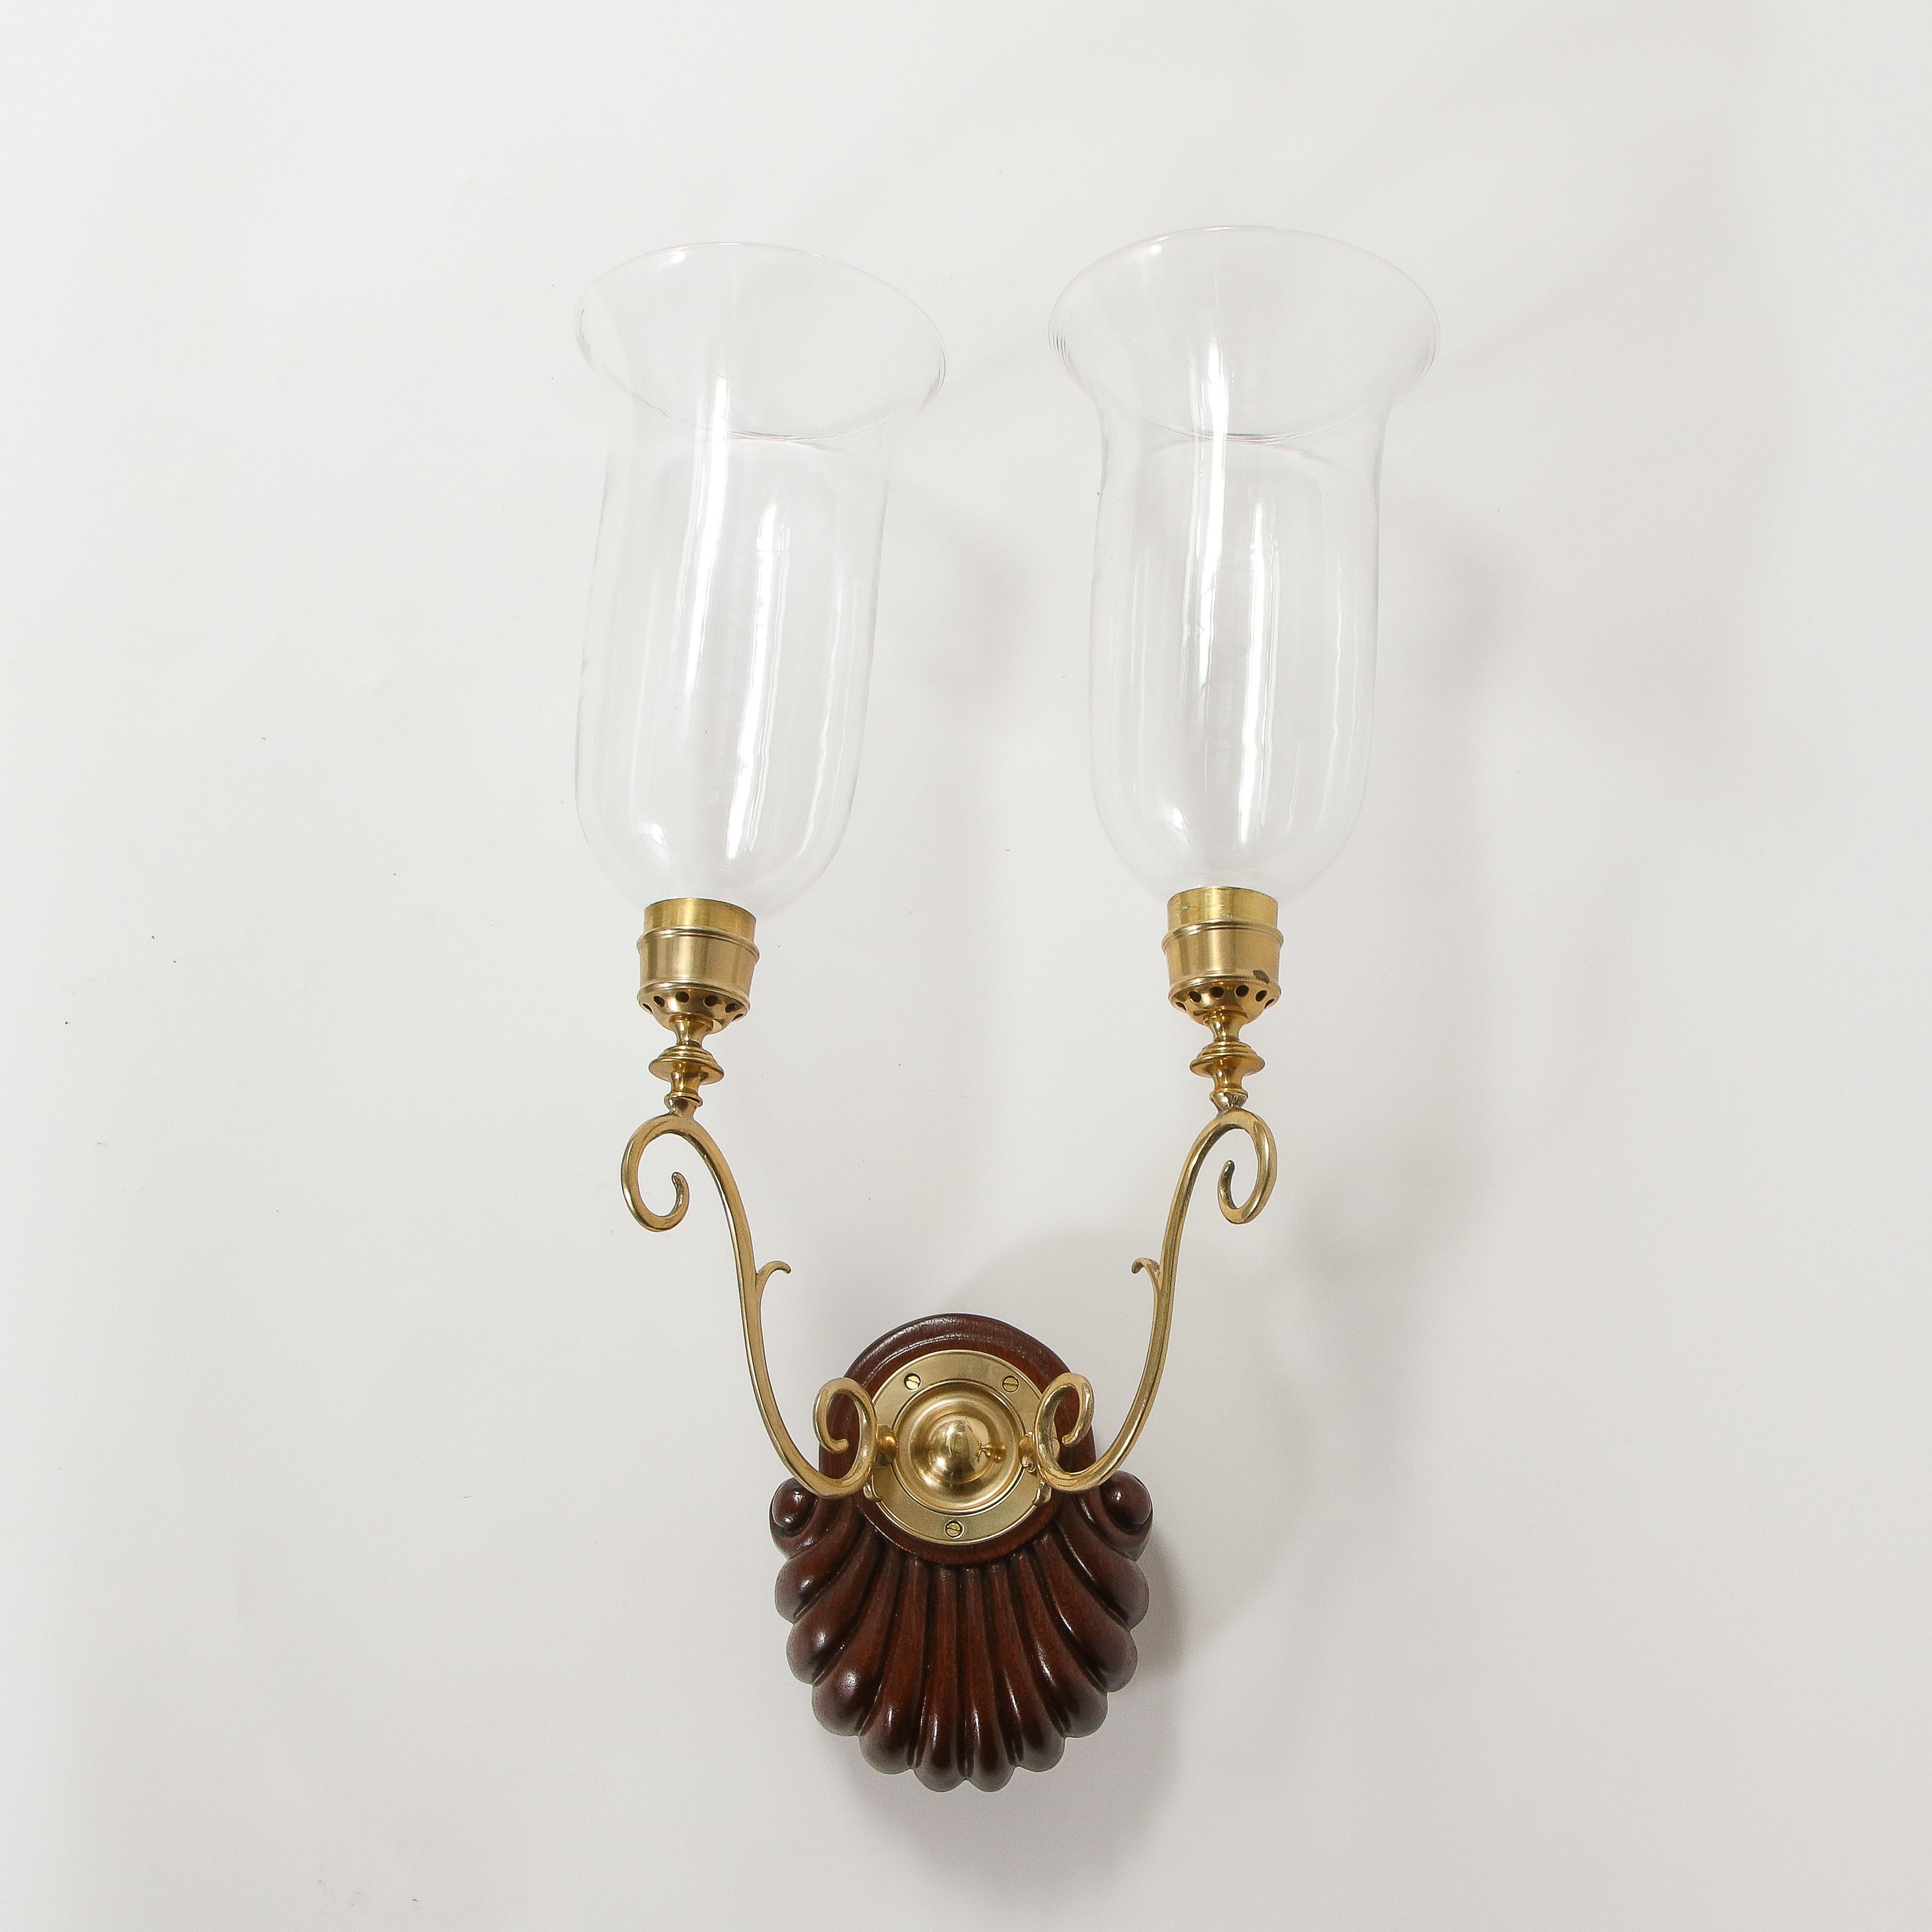 Each with carved hardwood shell-form backplate issuing two brass outward scrolling candlers fitted with bell-shaped clear glass hurricane shades.